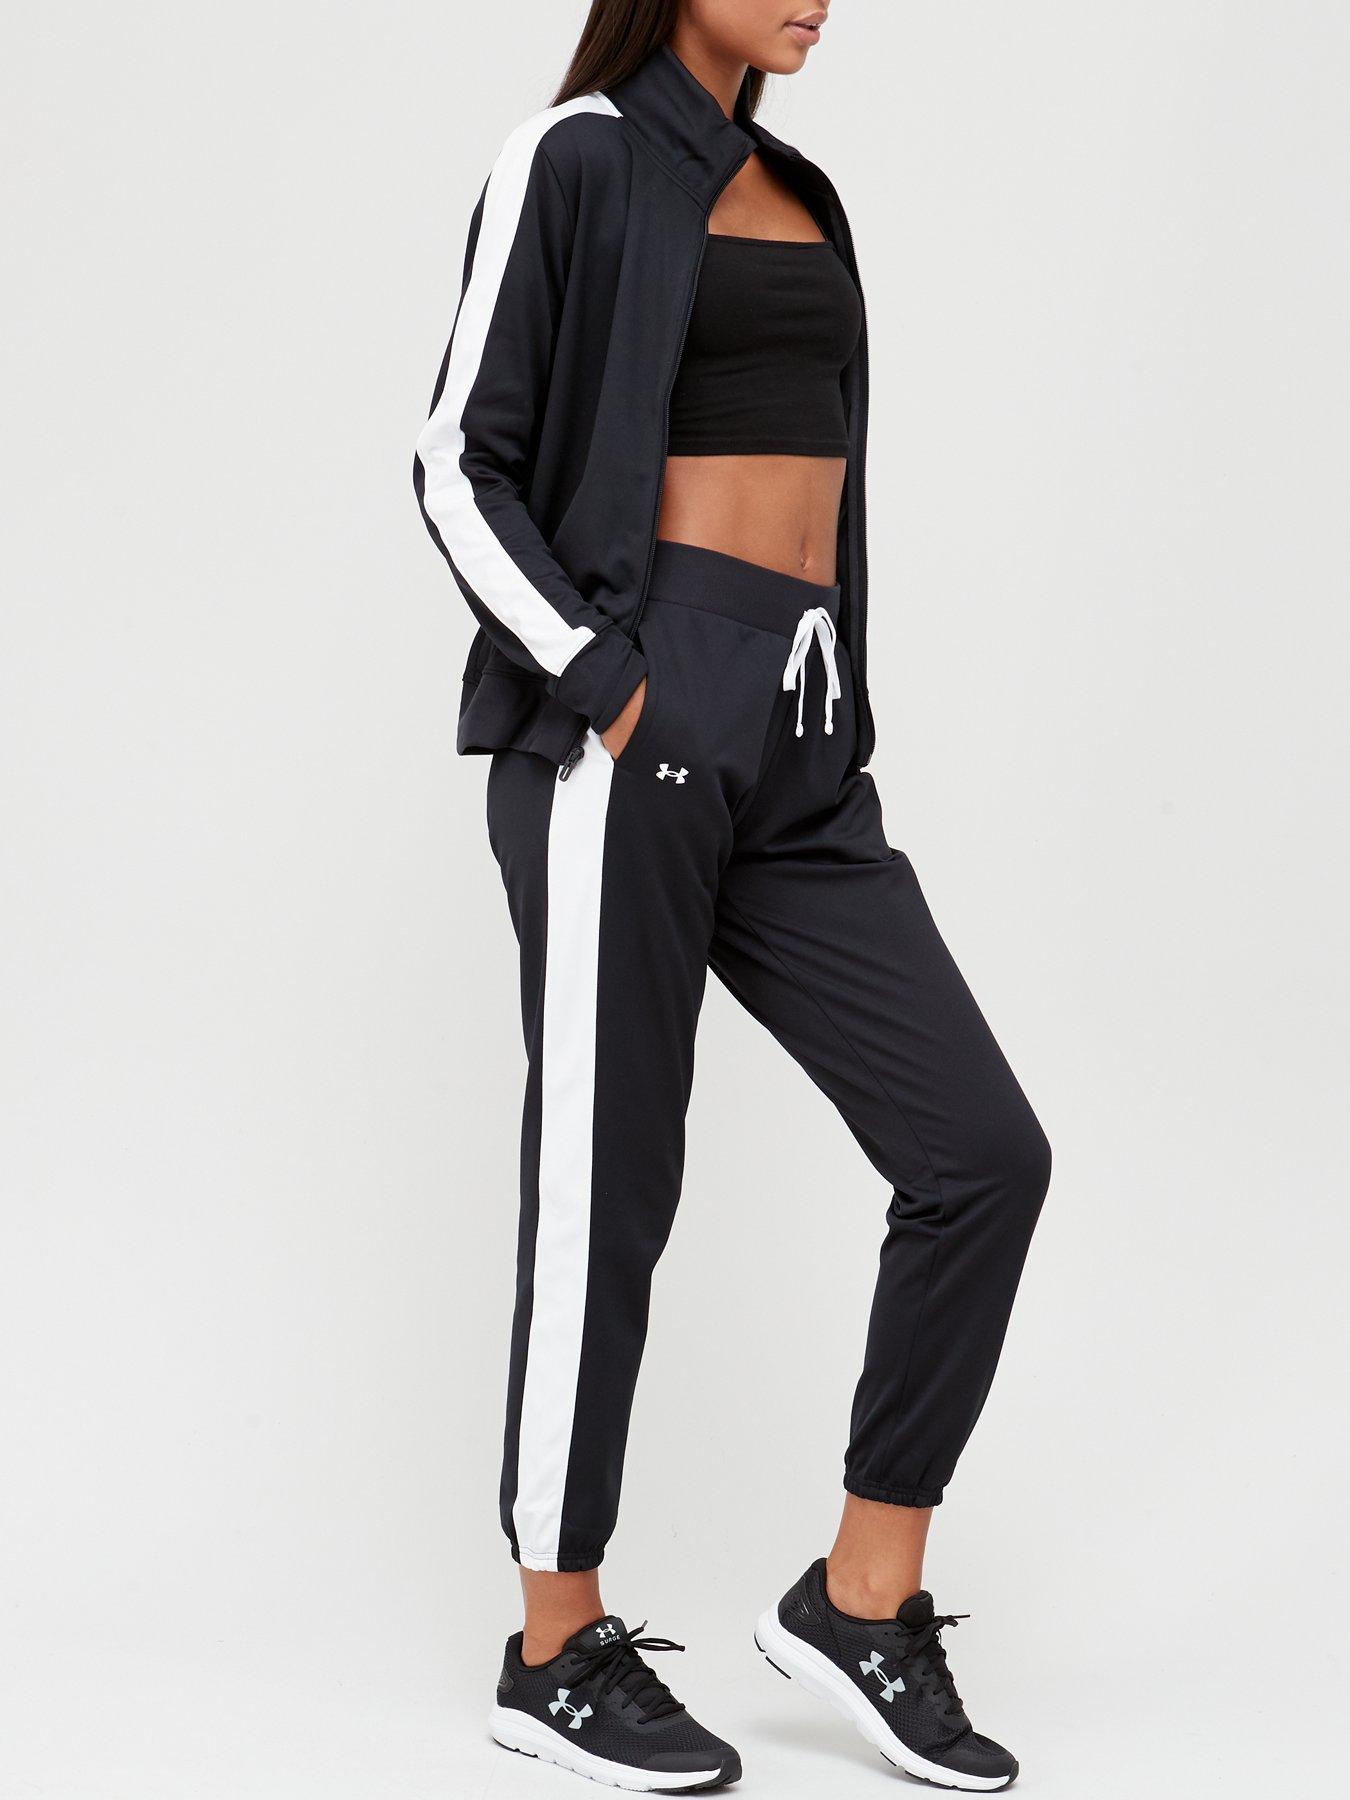 Tricot Tracksuit Women - Grey